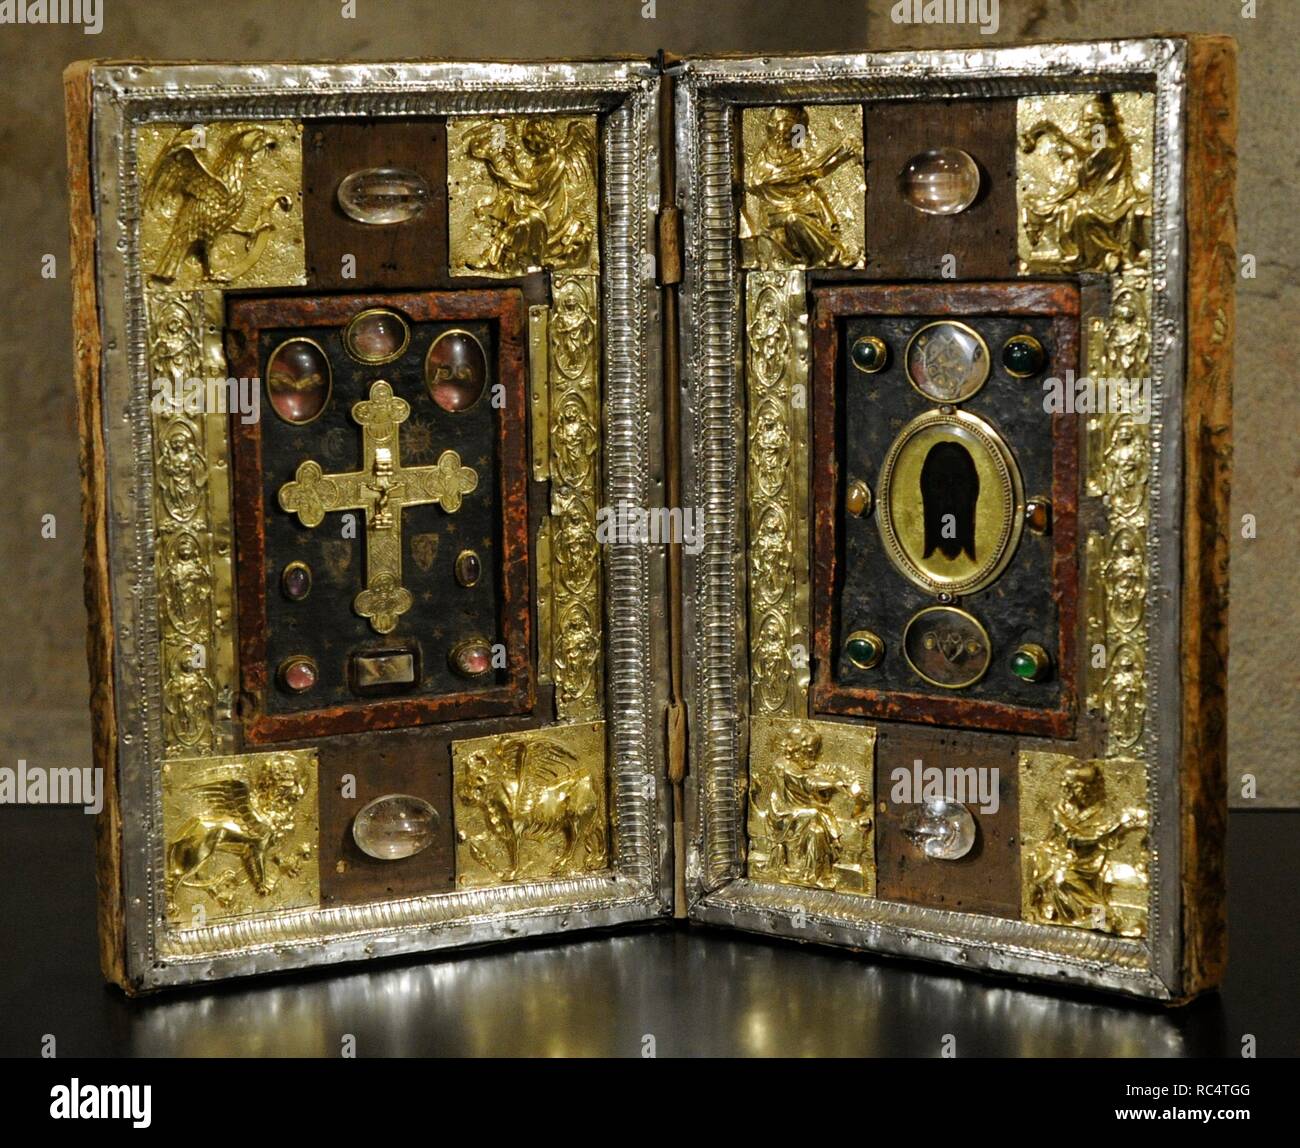 Reliquary Diptych. 14th century with later modifications. France. Reliefes: silver, repousse and gilded. Varieties of wood, painting, klosterarbeit, rock crystal, glass, reverse glass painting, decoratives stones. Museum Schnu tgen. Cologne, Germany. Stock Photo